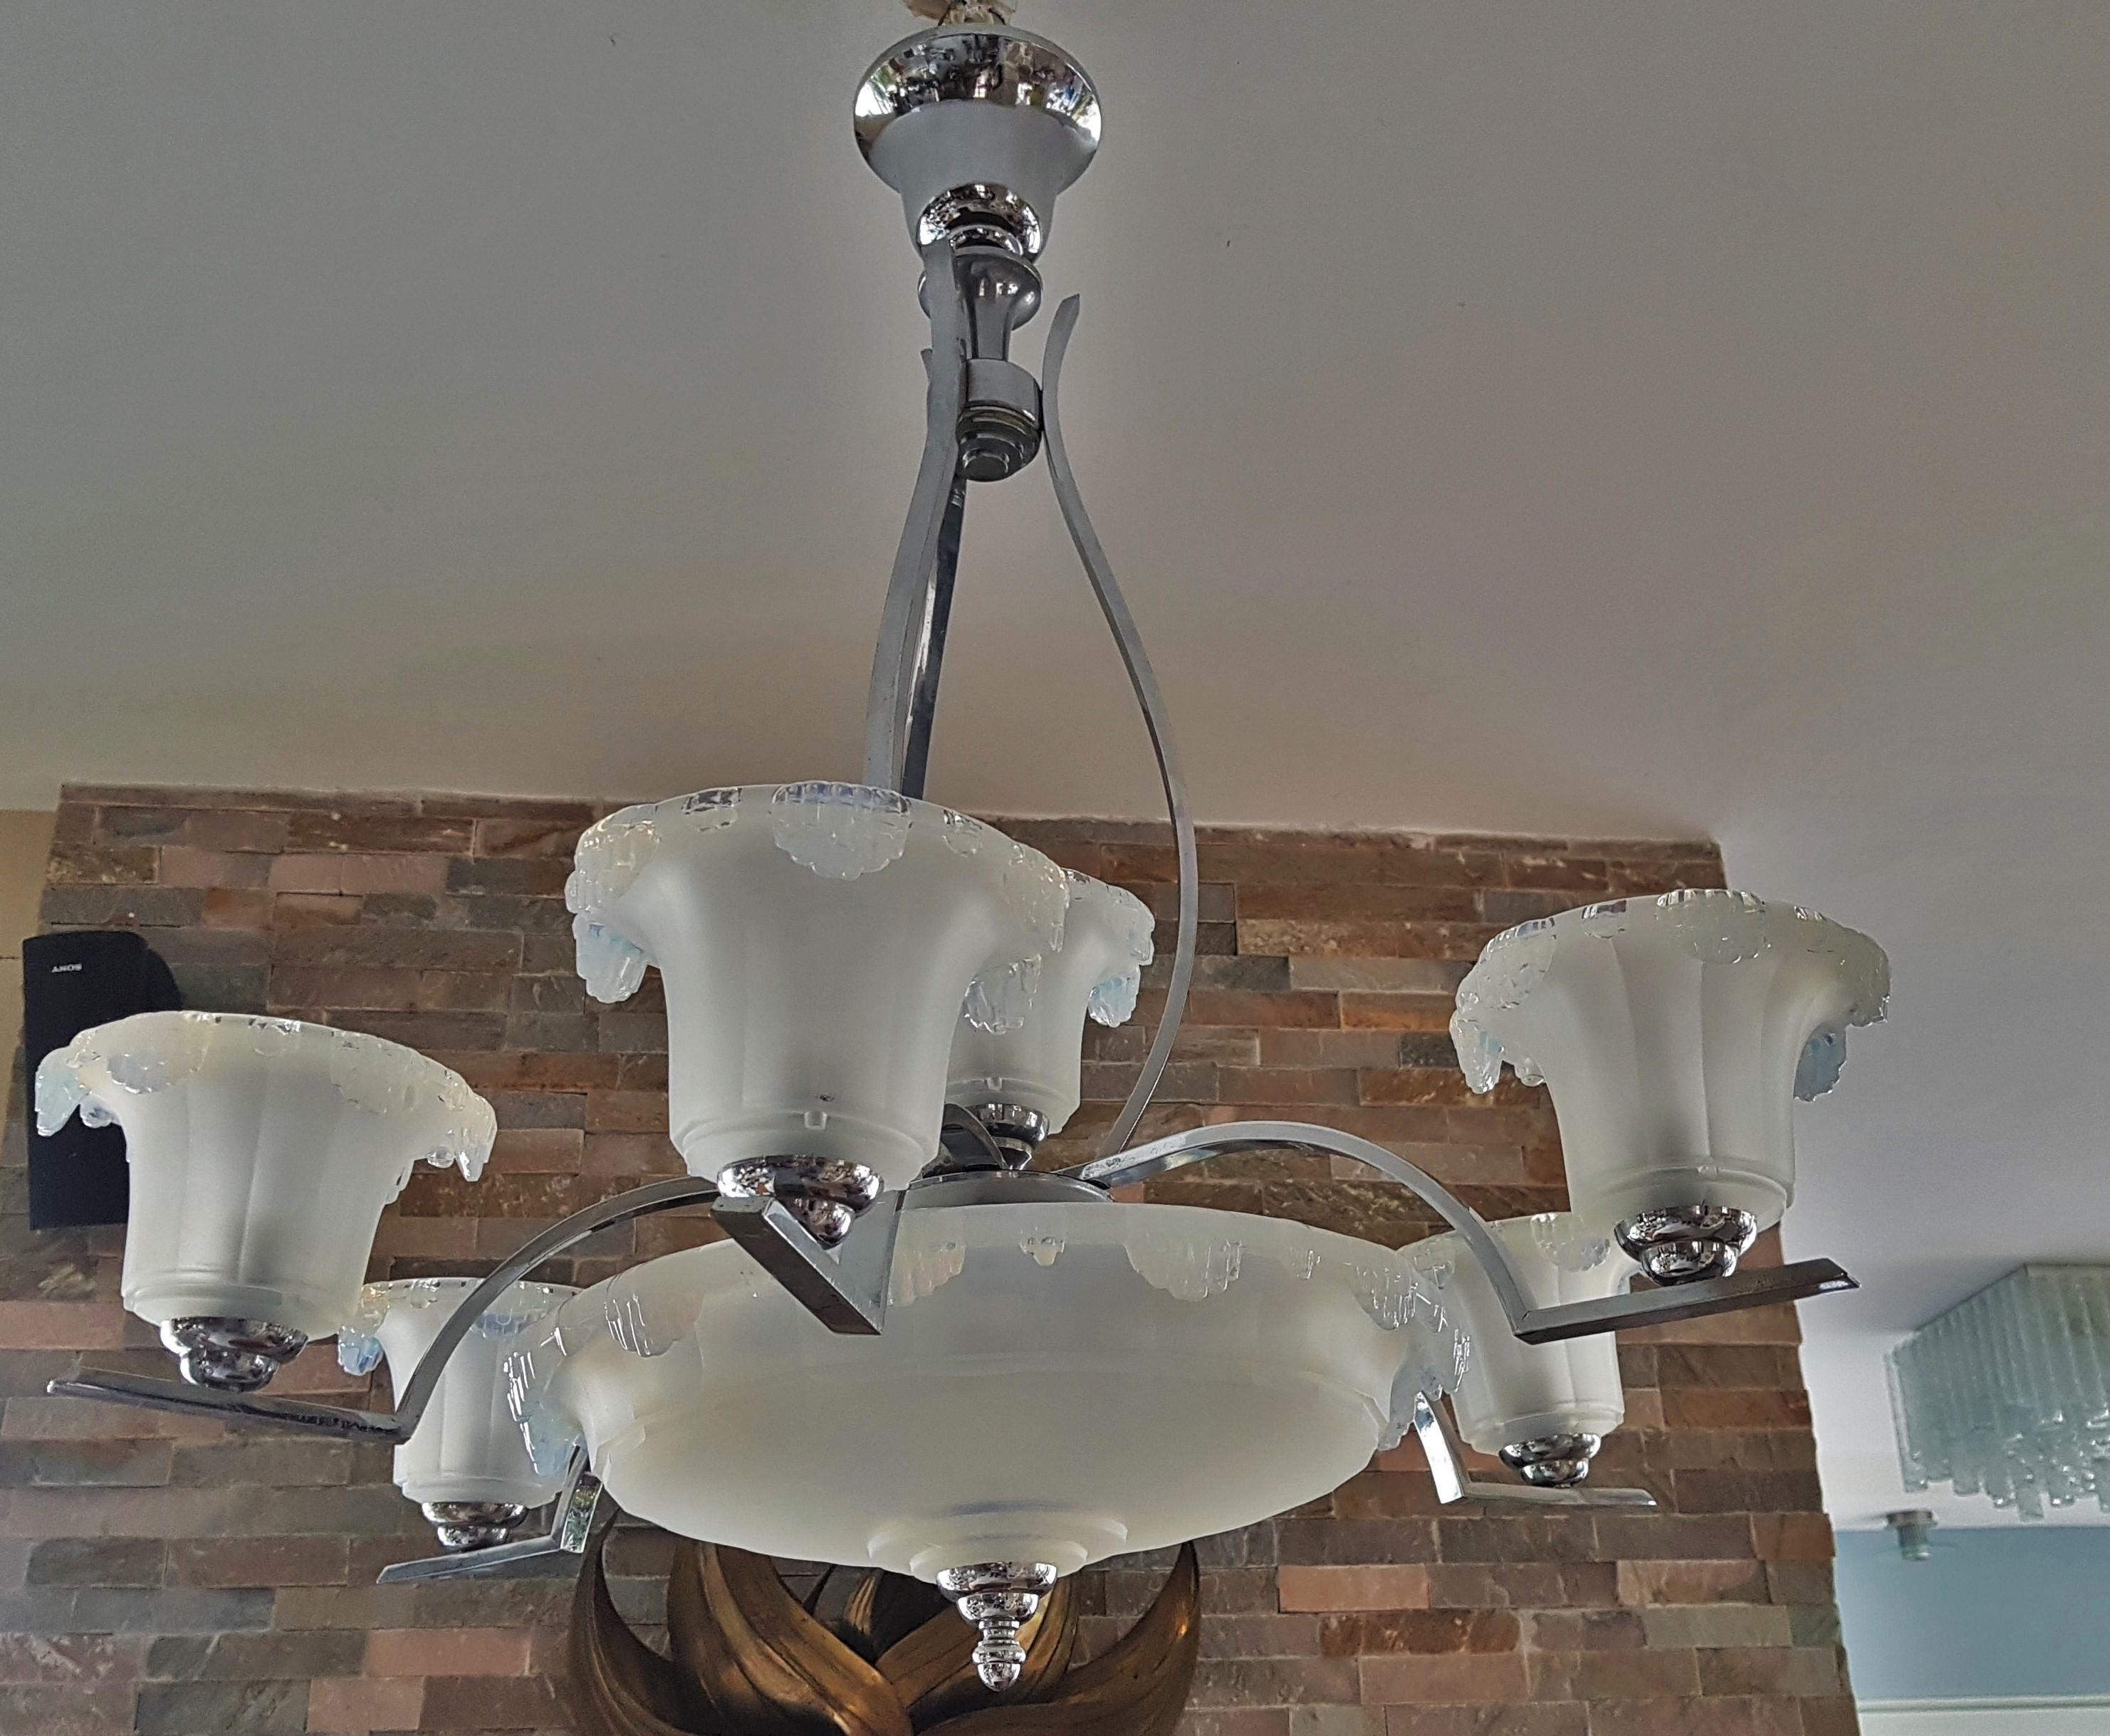 Art Glass Art Deco Opalescent Glass and Chrome Chandelier by Ezan & Petitot, France 1930s For Sale